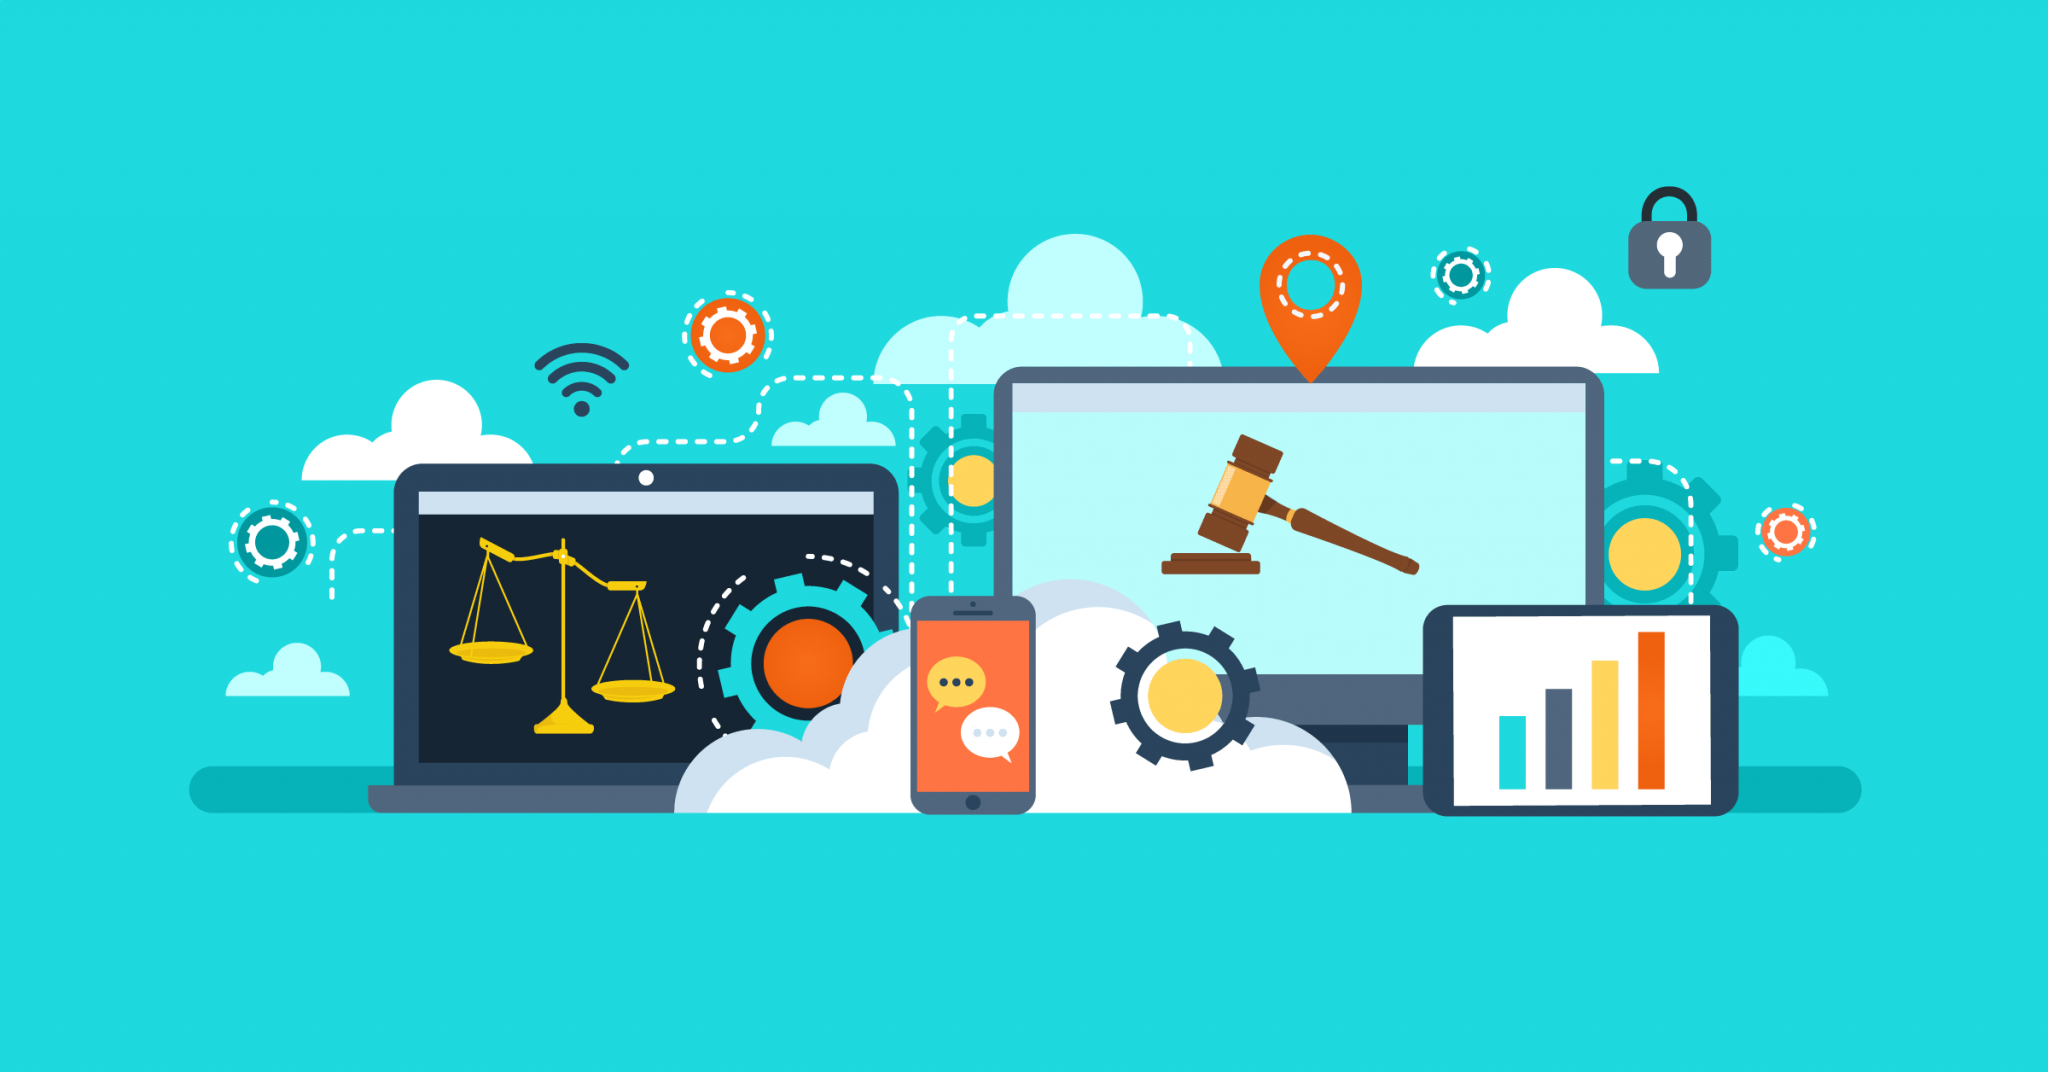 Illustrated webinar design showing legal concepts, like scales of justice and a gavel, on digital devices.